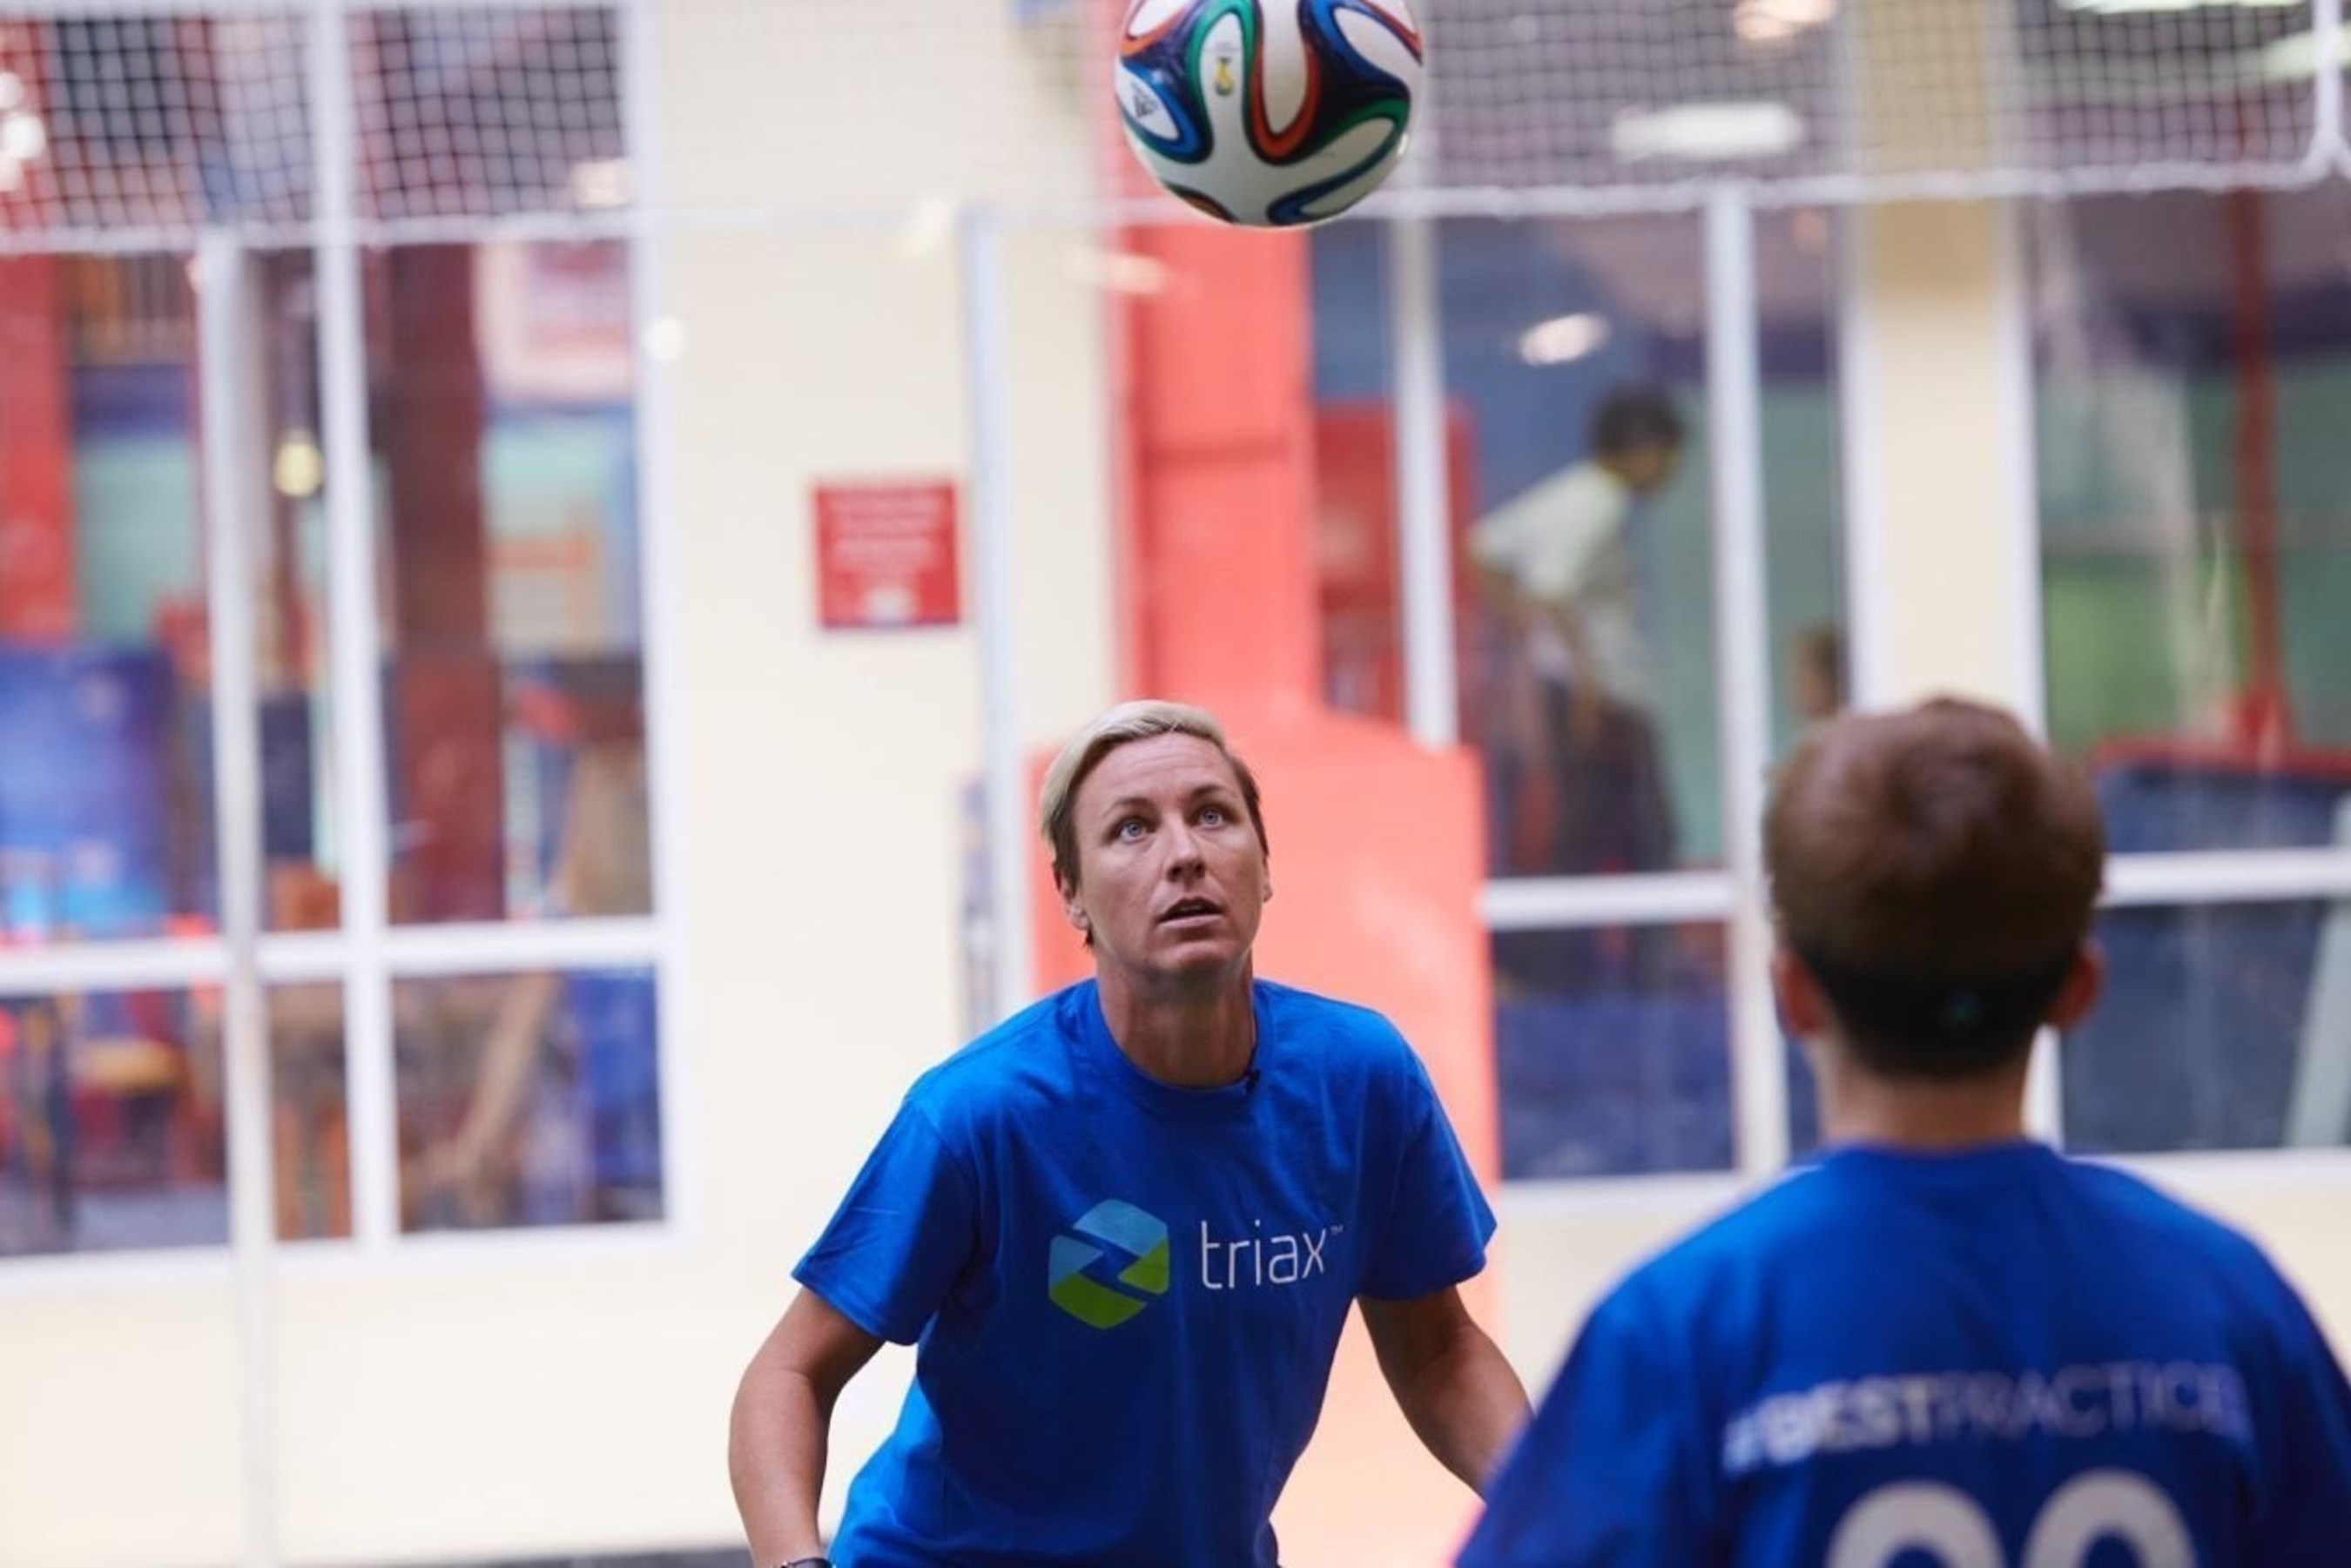 Abby Wambach demonstrates safe heading technique during Triax Tec #BestPractices training session.  Triax today announced partnership with IBM Watson Ecosystem as part of concussion research and safety for players.